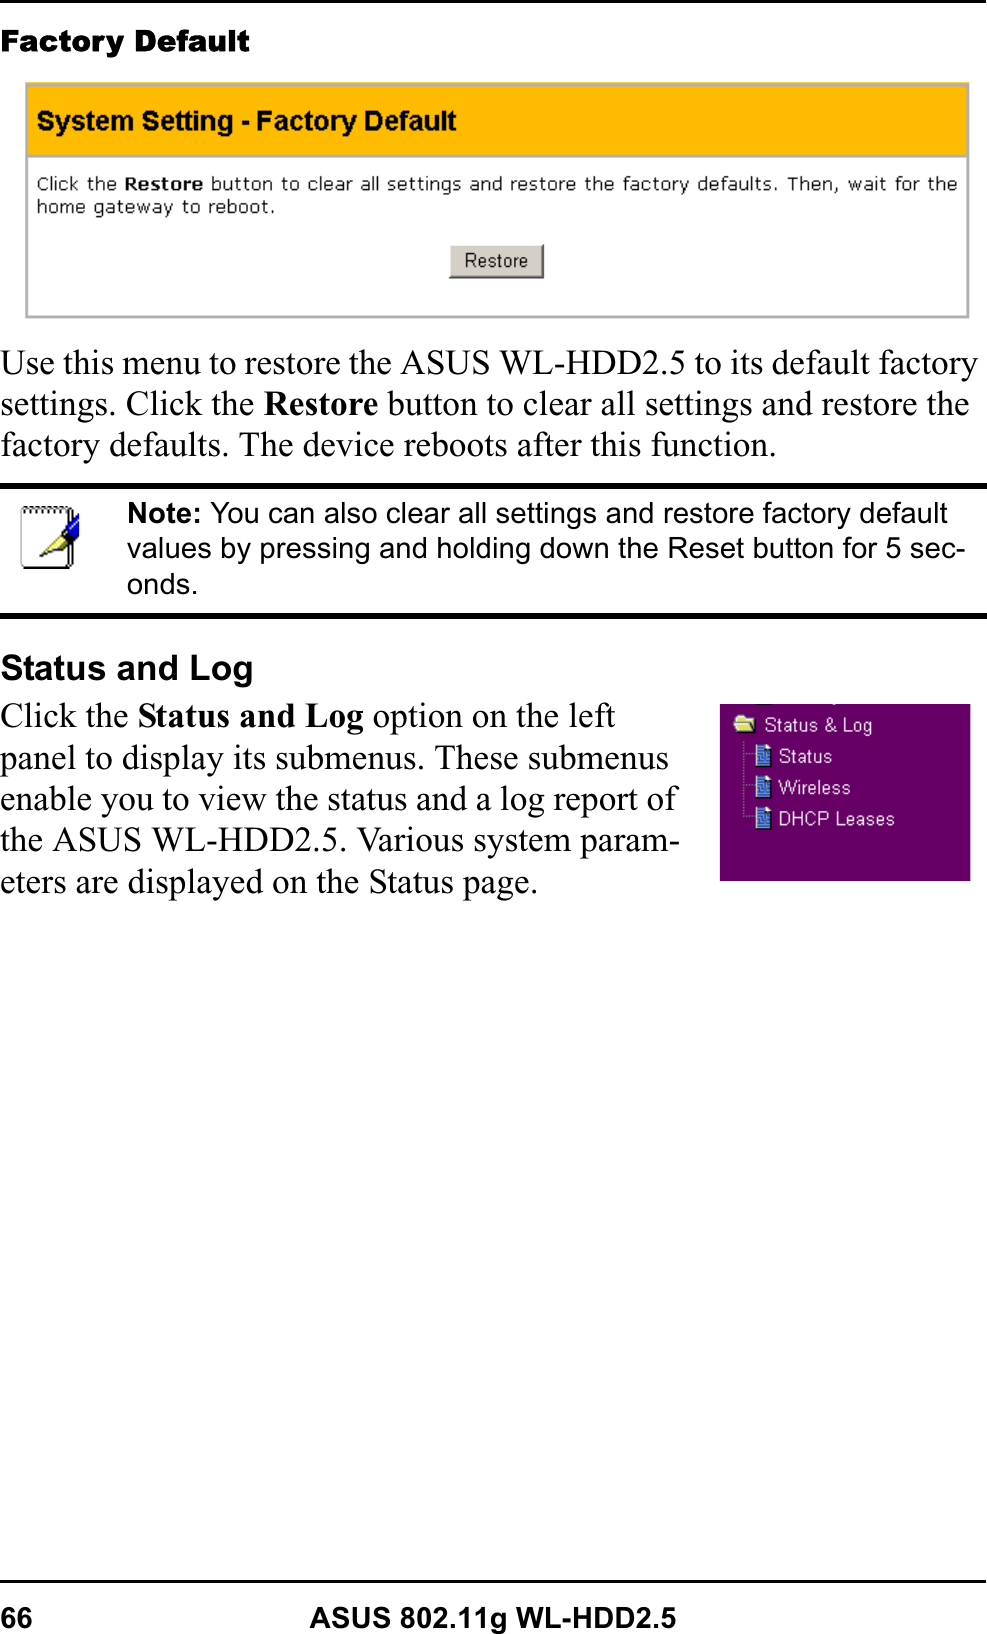 66 ASUS 802.11g WL-HDD2.5Factory DefaultUse this menu to restore the ASUS WL-HDD2.5 to its default factory settings. Click the Restore button to clear all settings and restore the factory defaults. The device reboots after this function.Status and LogClick the Status and Log option on the left panel to display its submenus. These submenus enable you to view the status and a log report of the ASUS WL-HDD2.5. Various system param-eters are displayed on the Status page.Note: You can also clear all settings and restore factory default values by pressing and holding down the Reset button for 5 sec-onds.